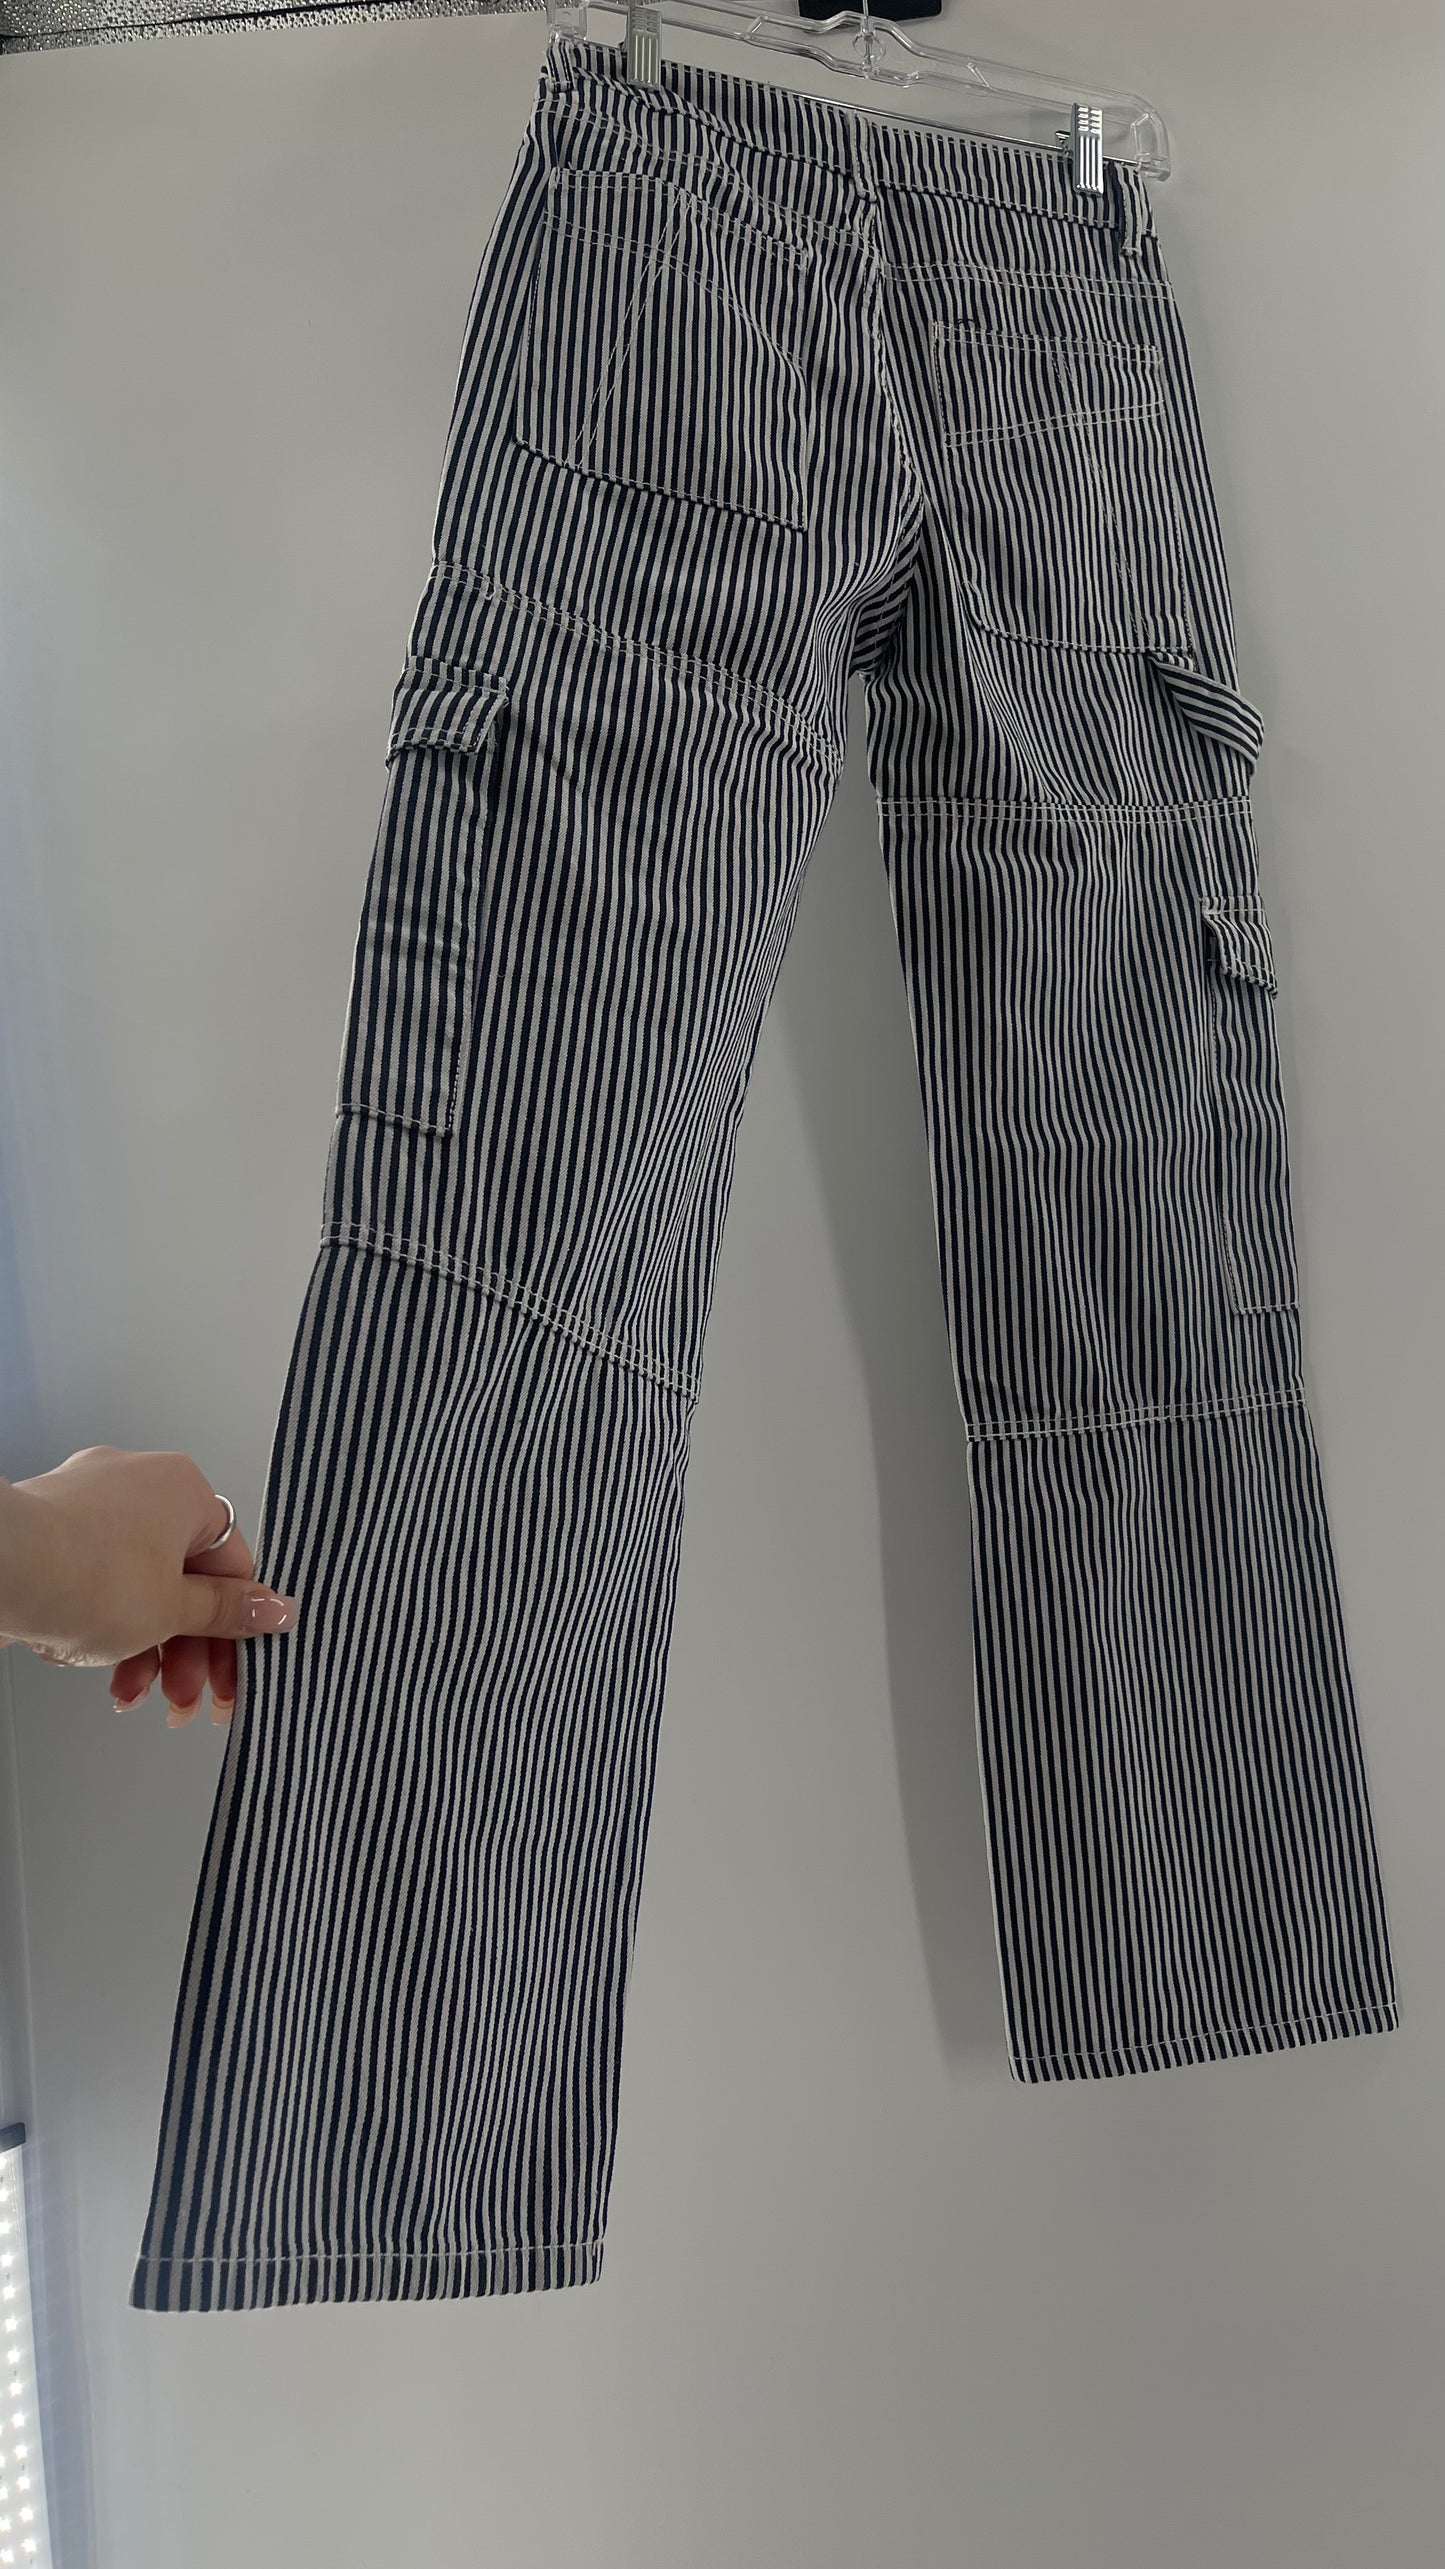 Edikted Stripe Out Cargos with Tags Attached (XS)